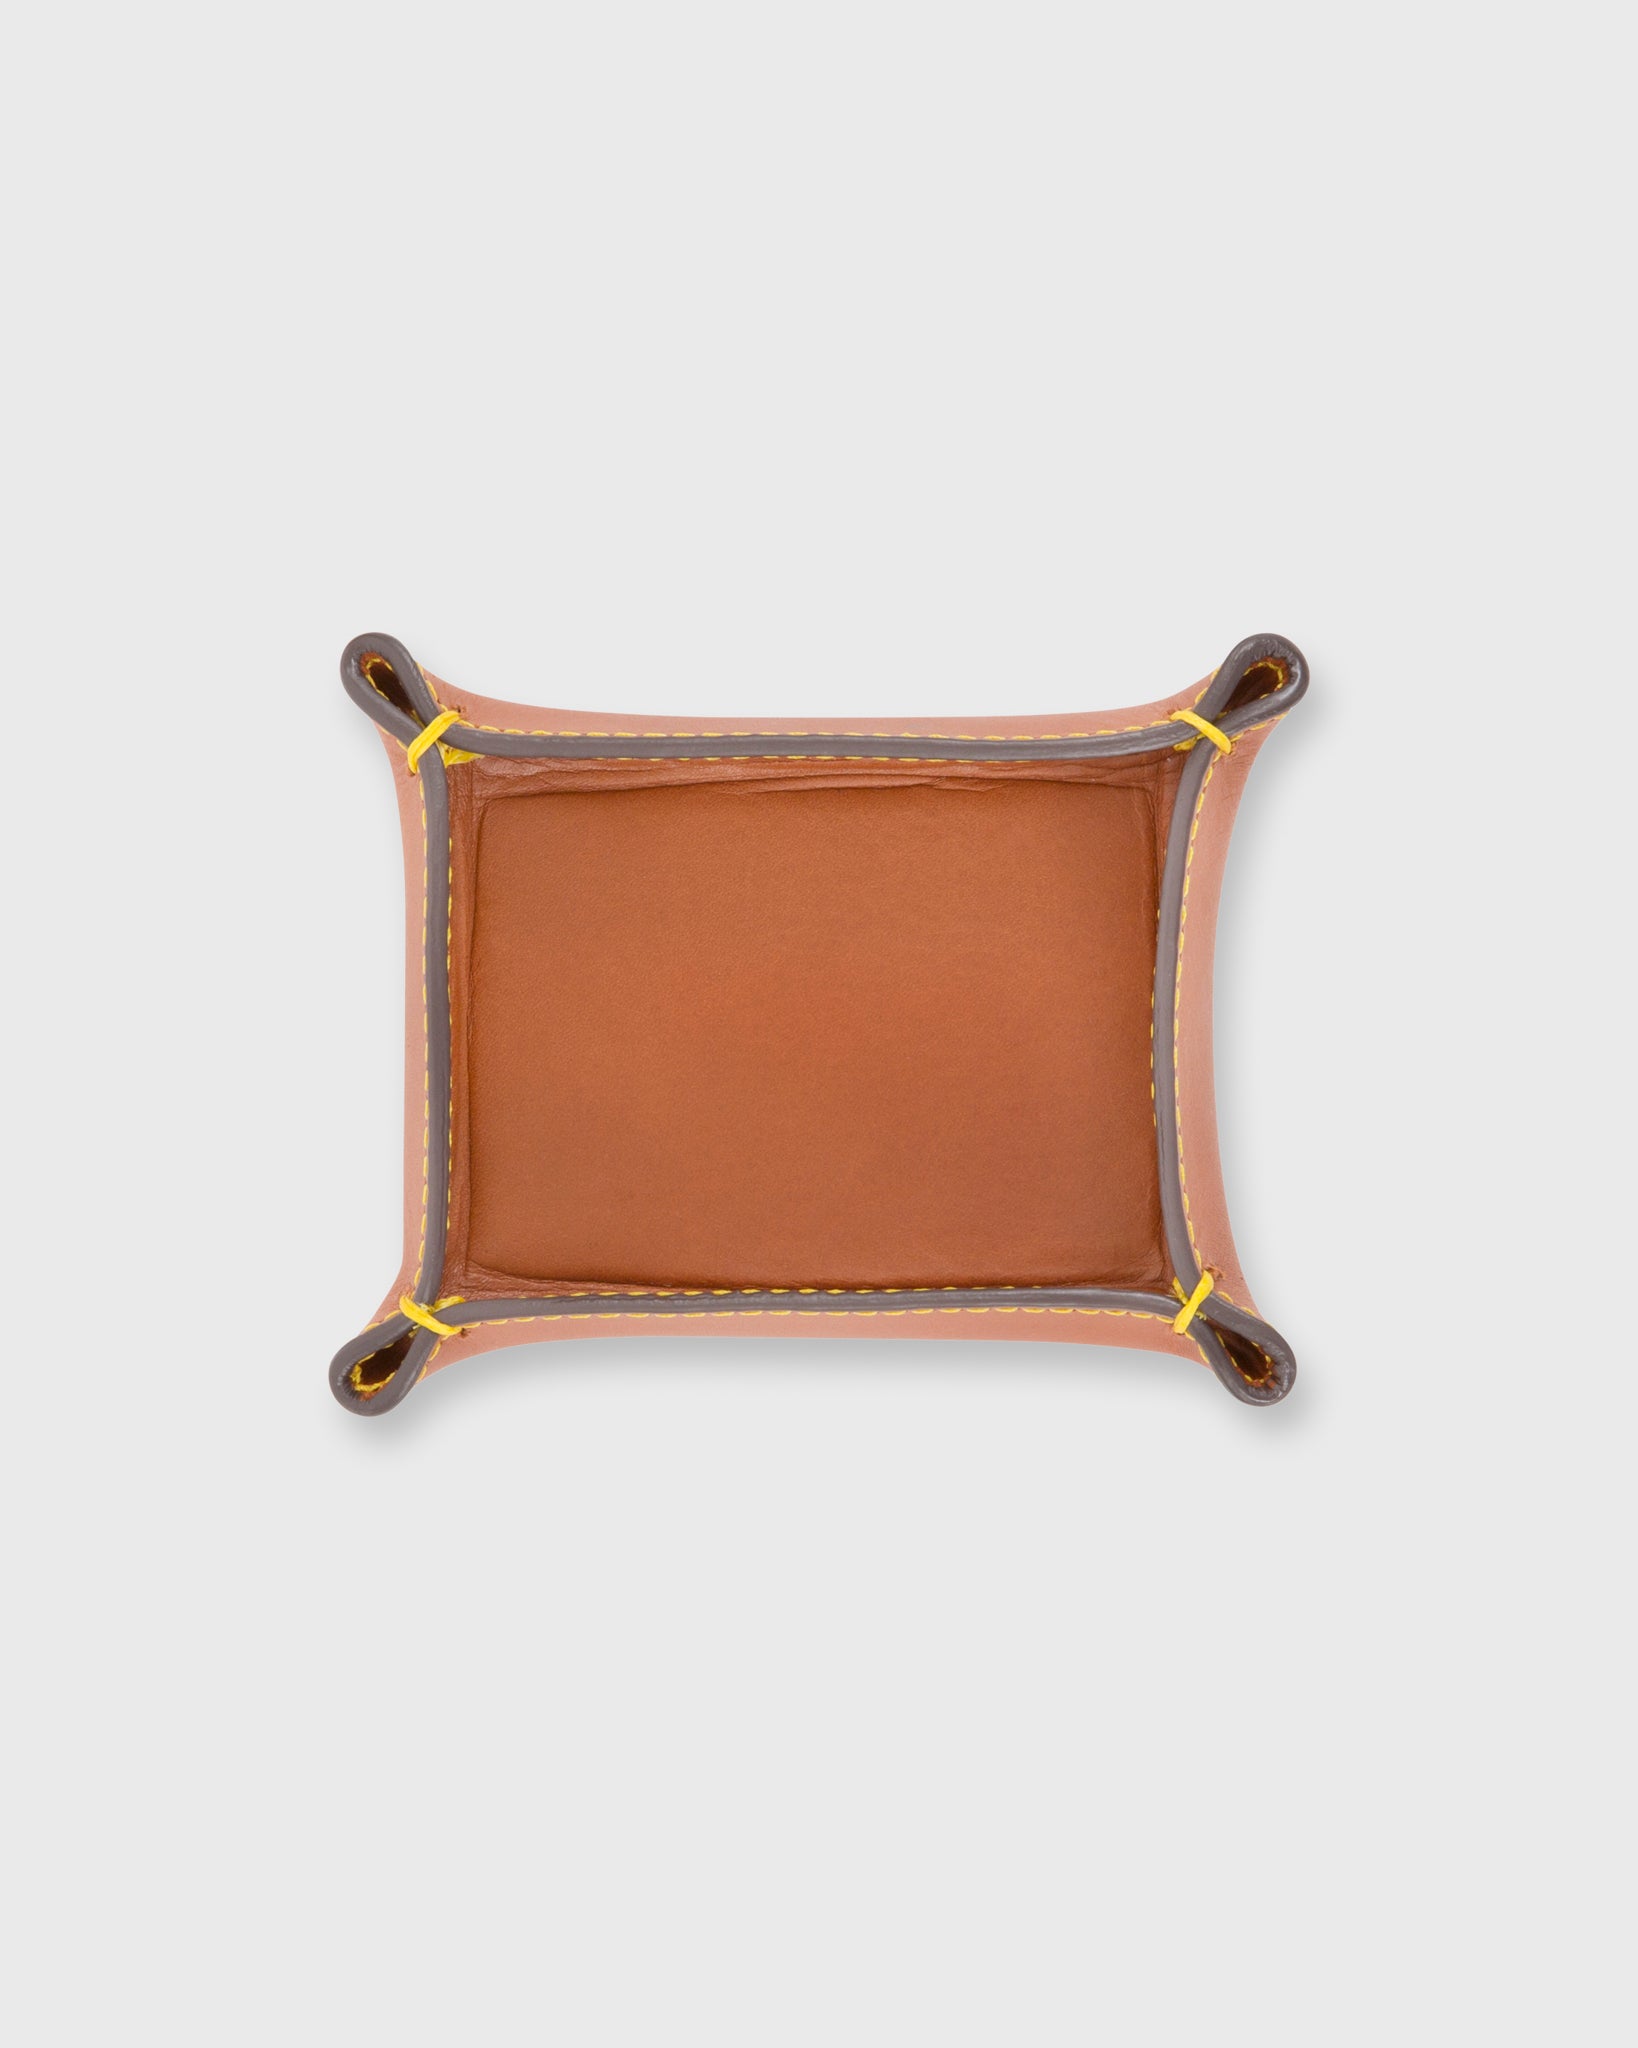 Small Tray in Golden Leather